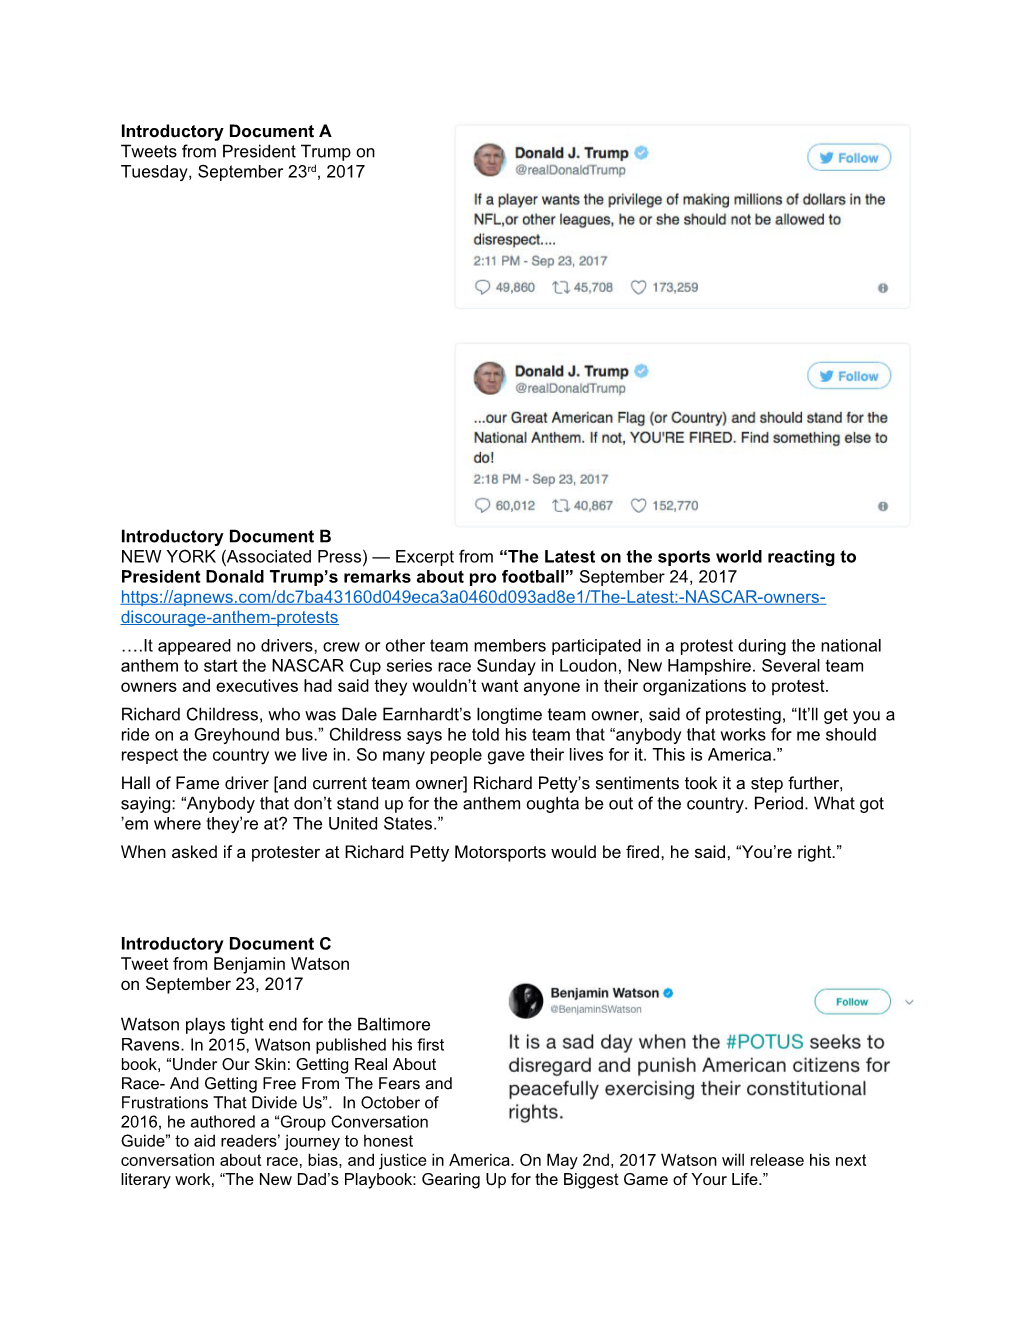 Tweets from President Trump on Tuesday, September 23Rd, 2017